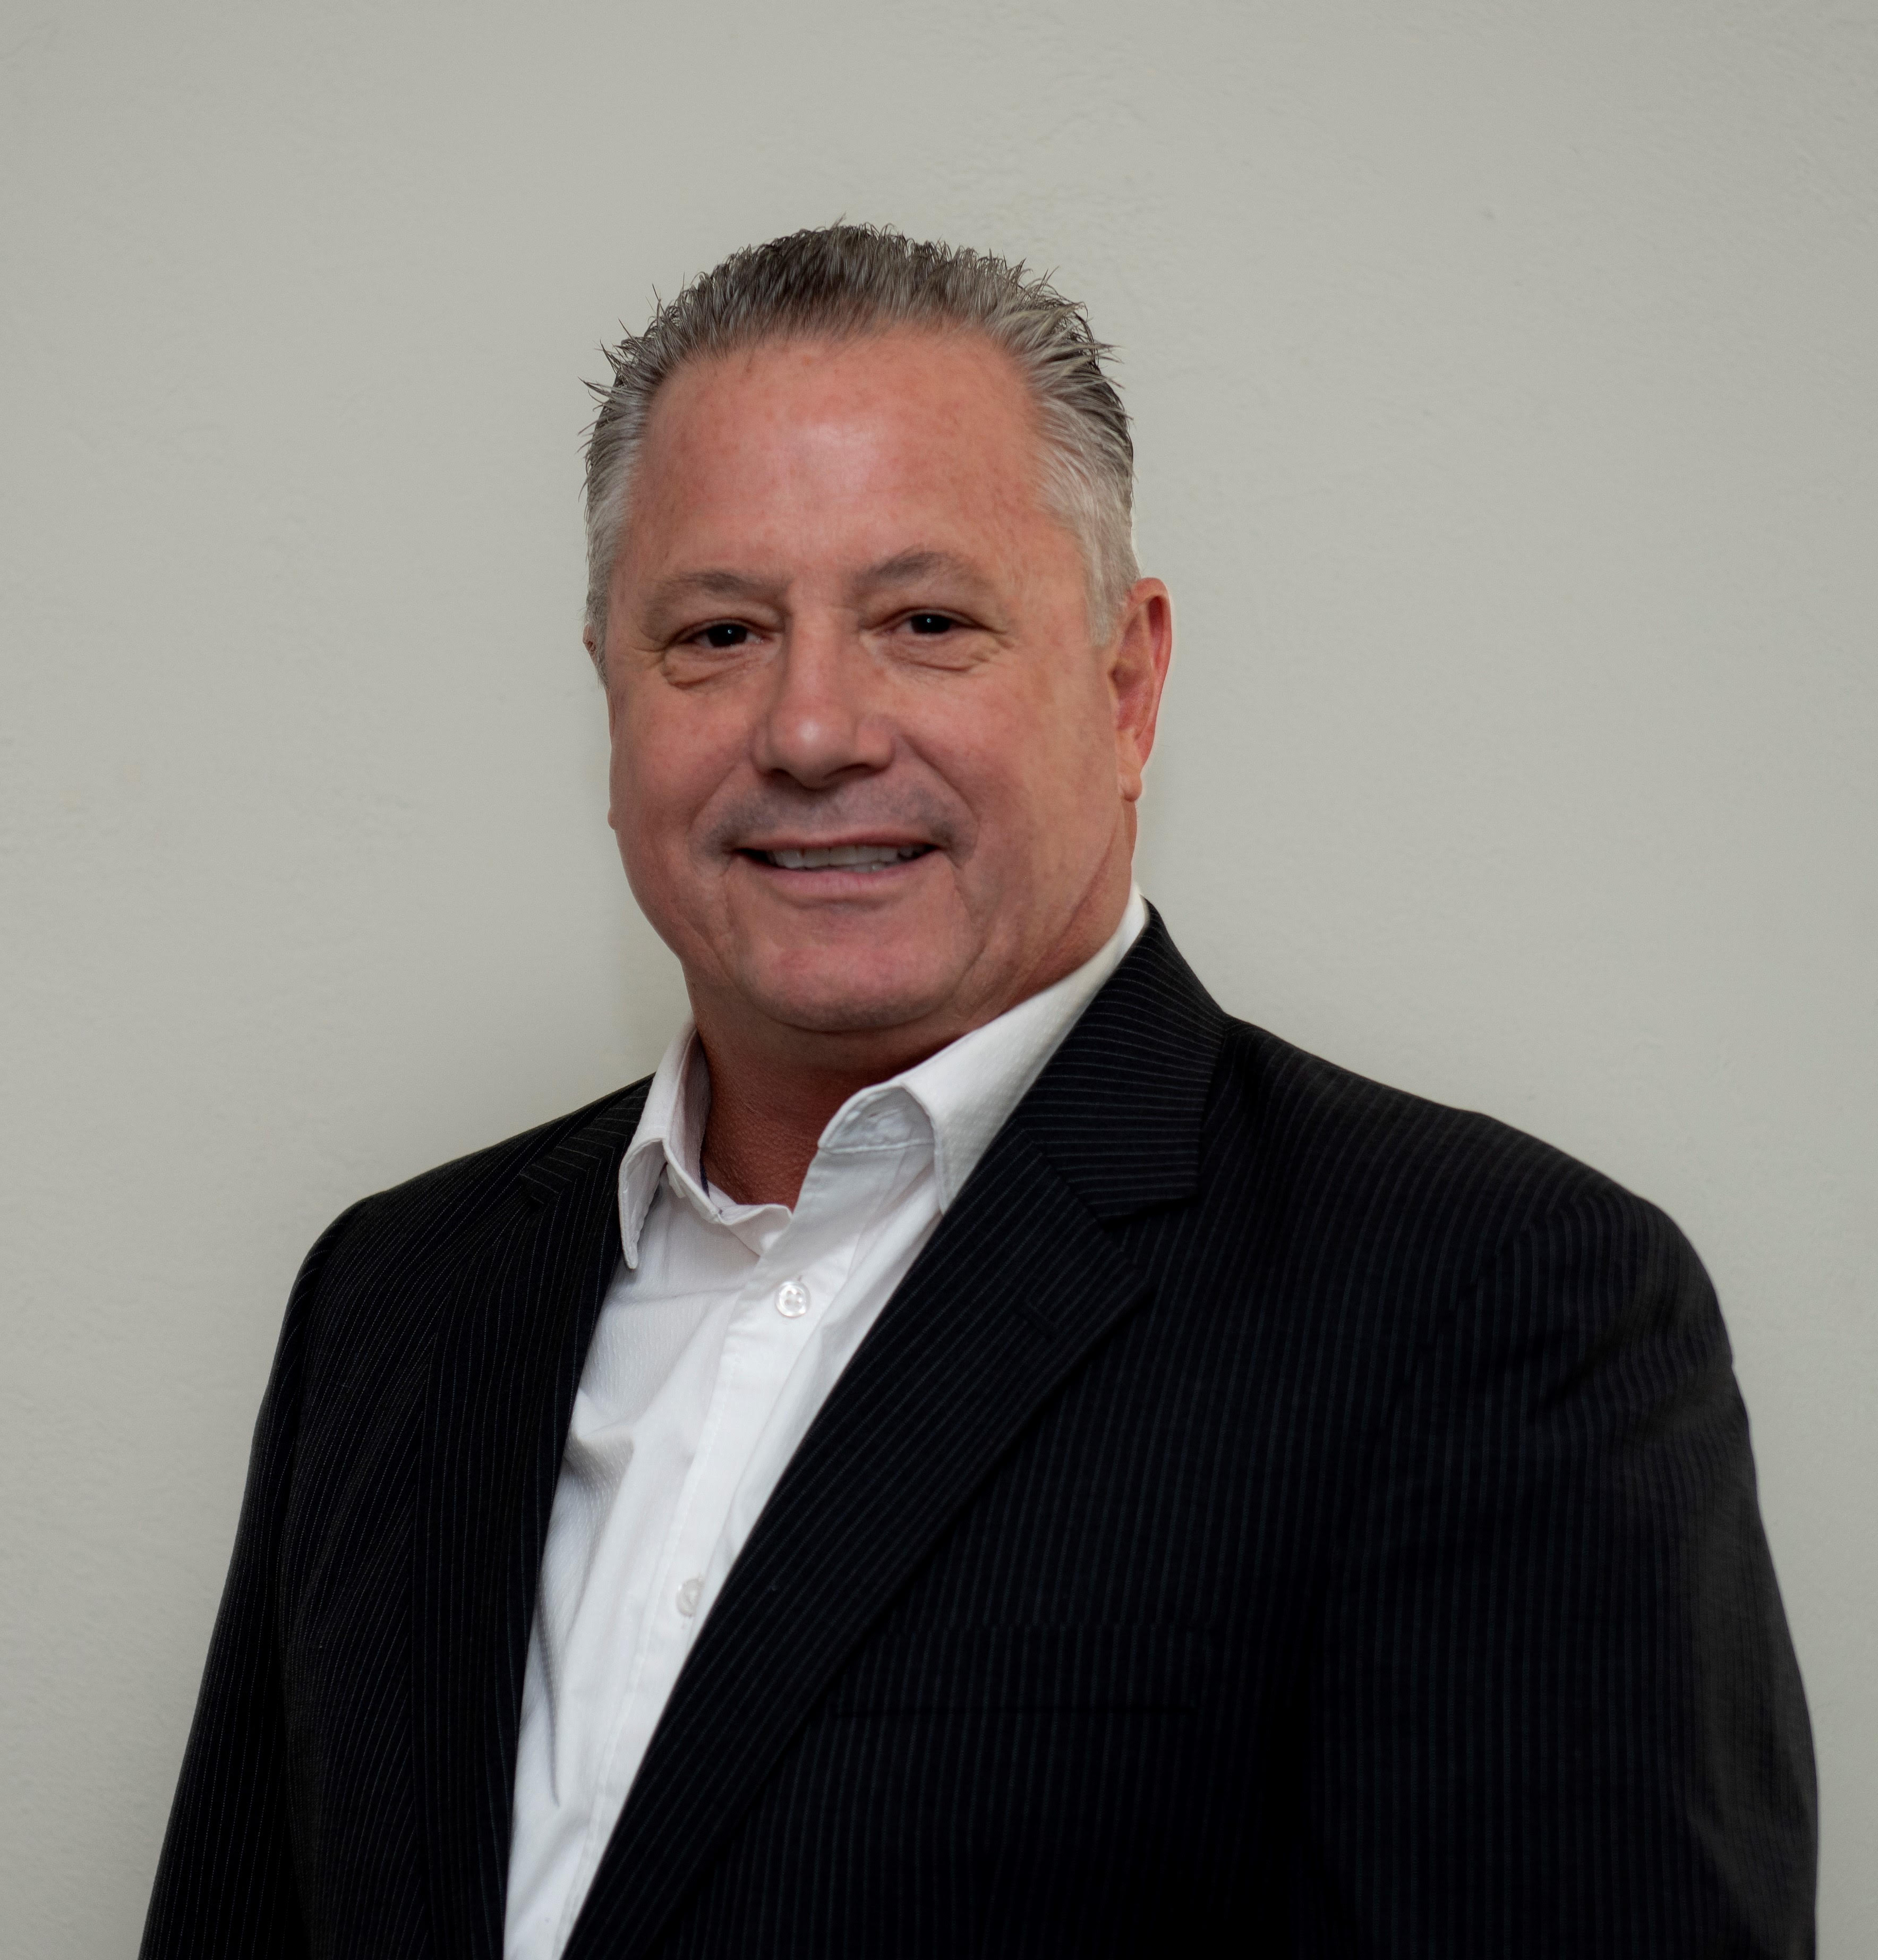 Energy Distribution Partners hires Don Vicari as general manager of Ebbets Propane Company august 2019 reports BPN the propane industry's leading source for news and information since 1939.